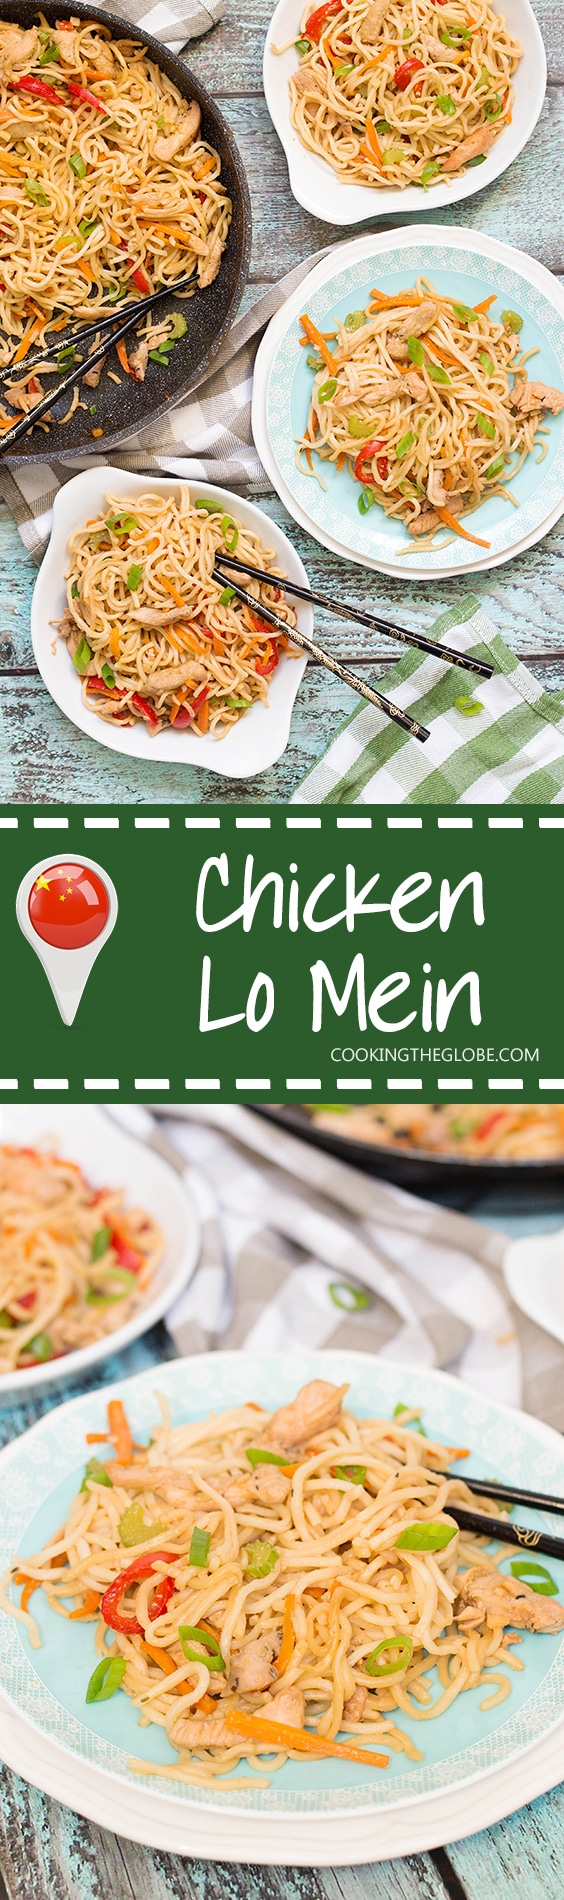 If you have ever been in Chinese restaurant, you must have tried Chicken Lo Mein. Did you know that you can make it at home? It's quick and easy to prepare! | cookingtheglobe.com